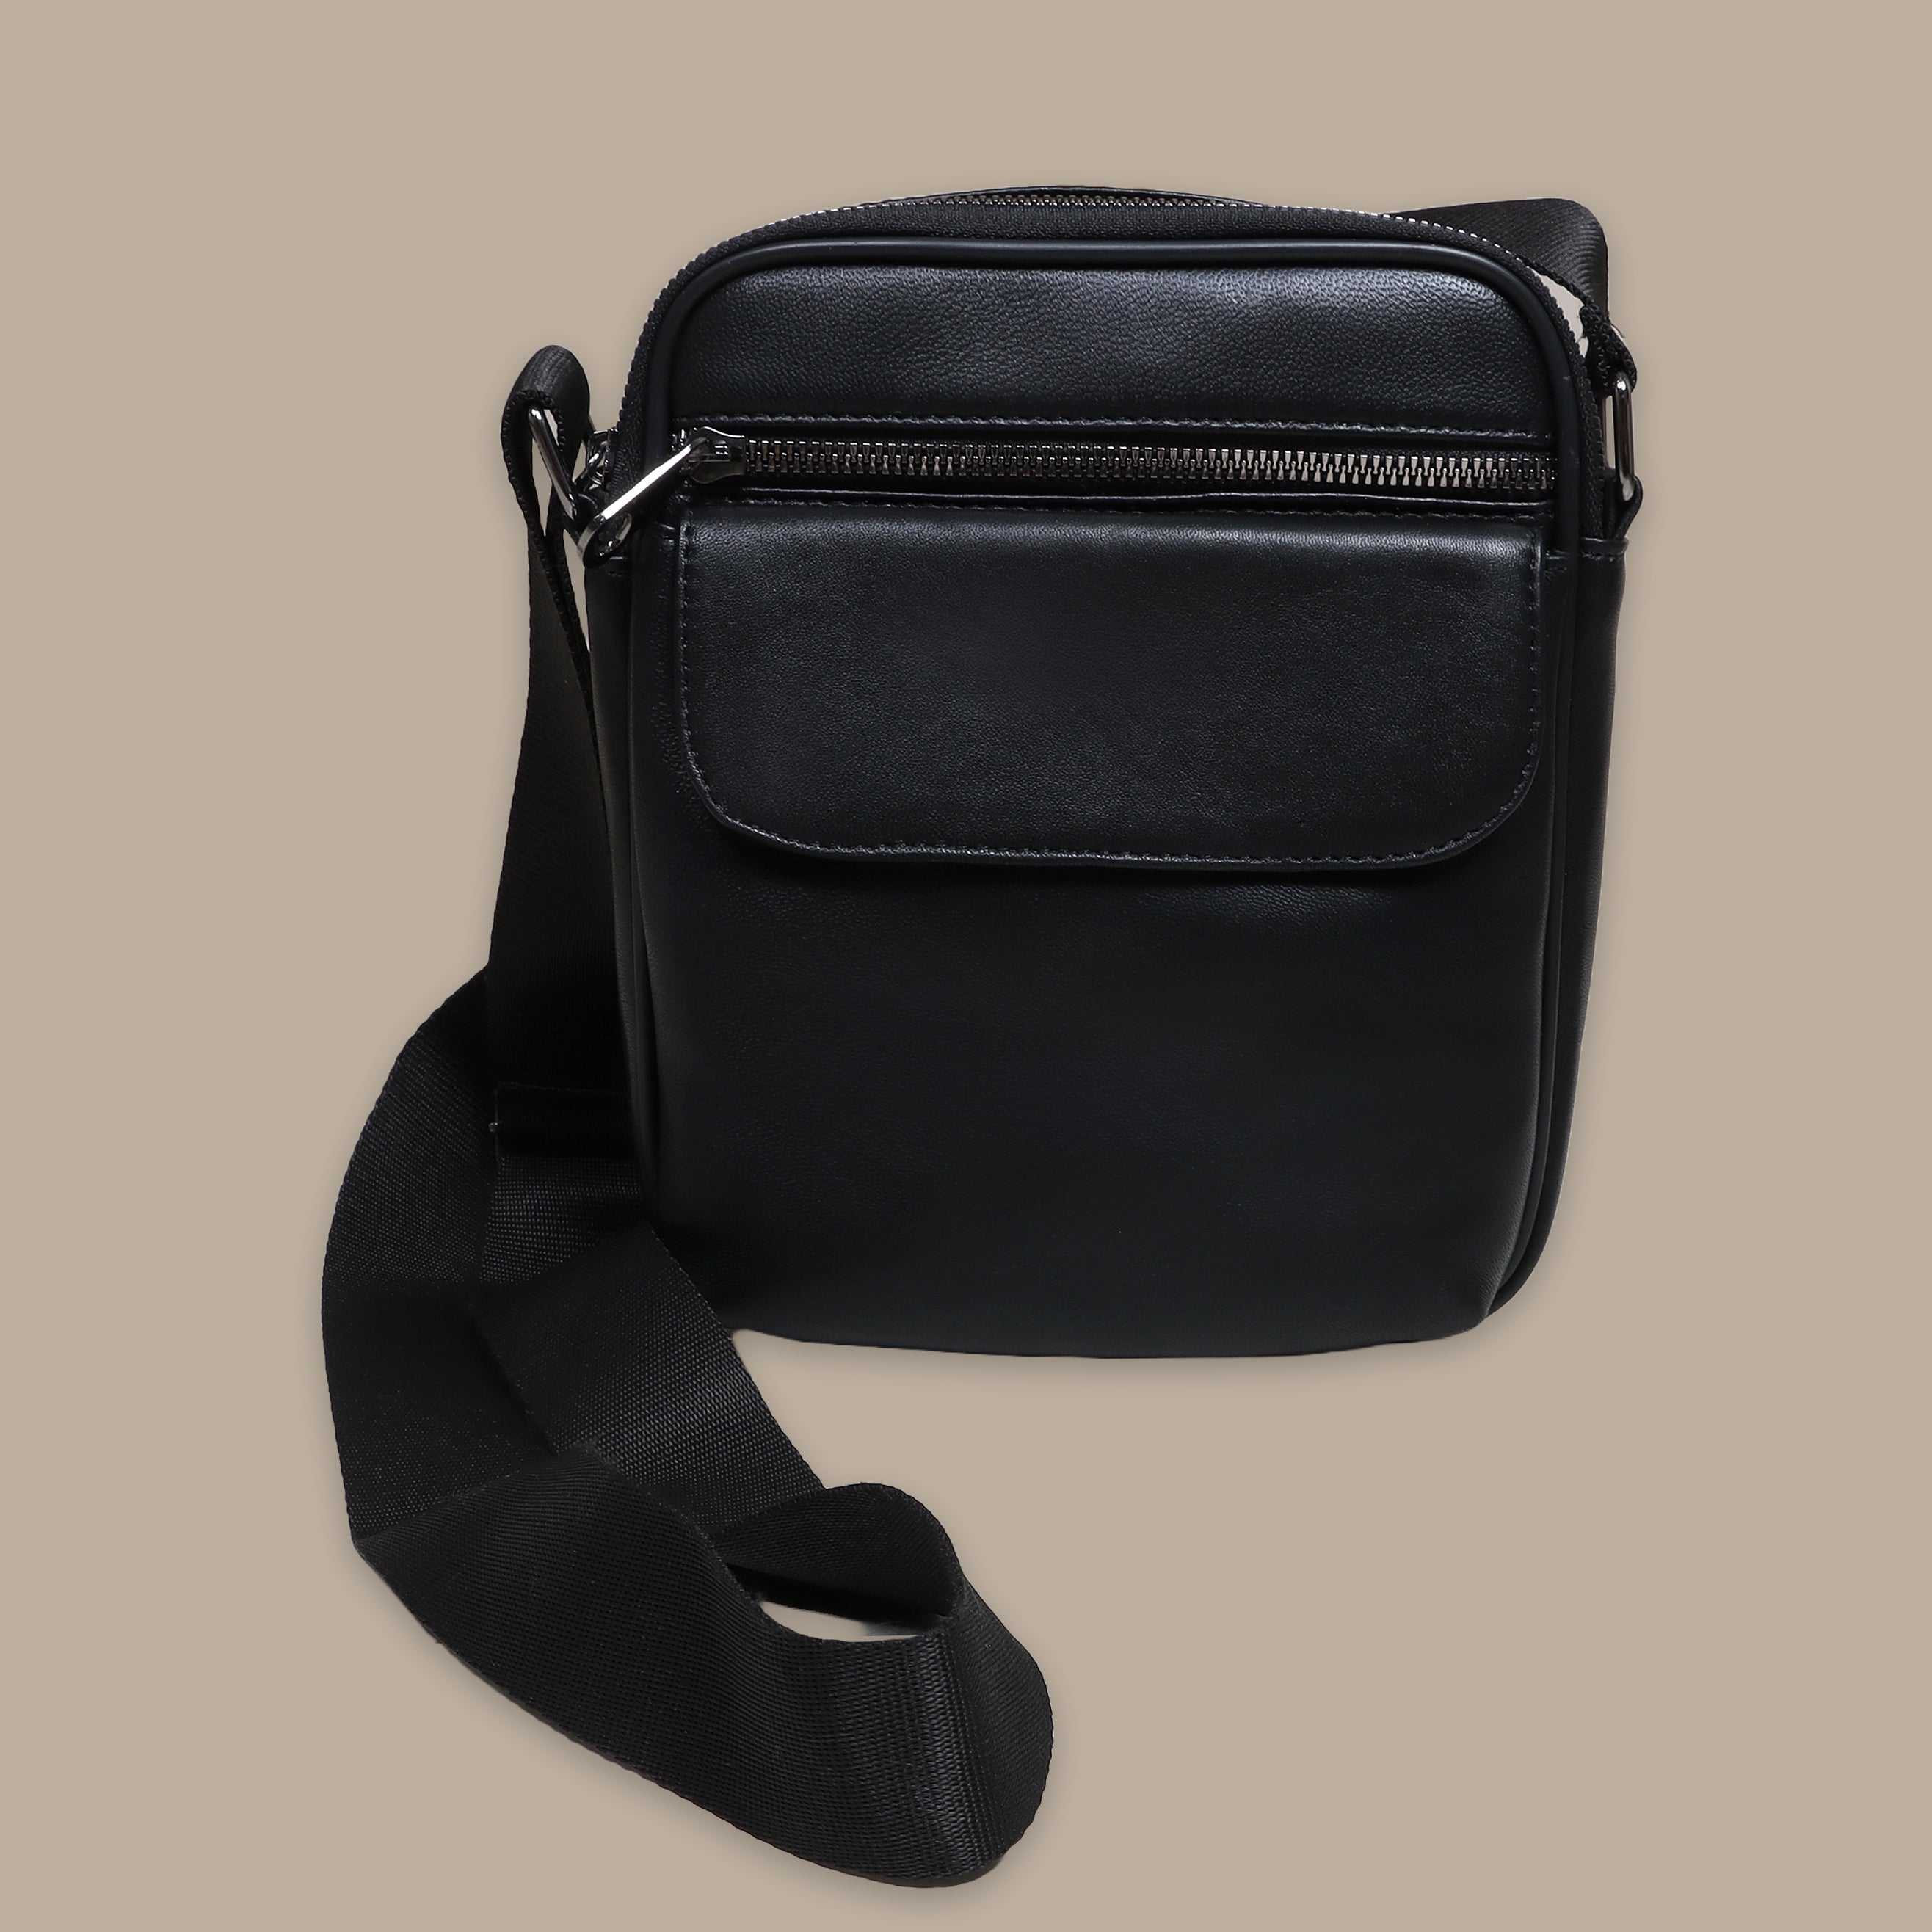 Nocturnal Utility: Black Leather Crossbody with Flap Pockets and Triple Zippers